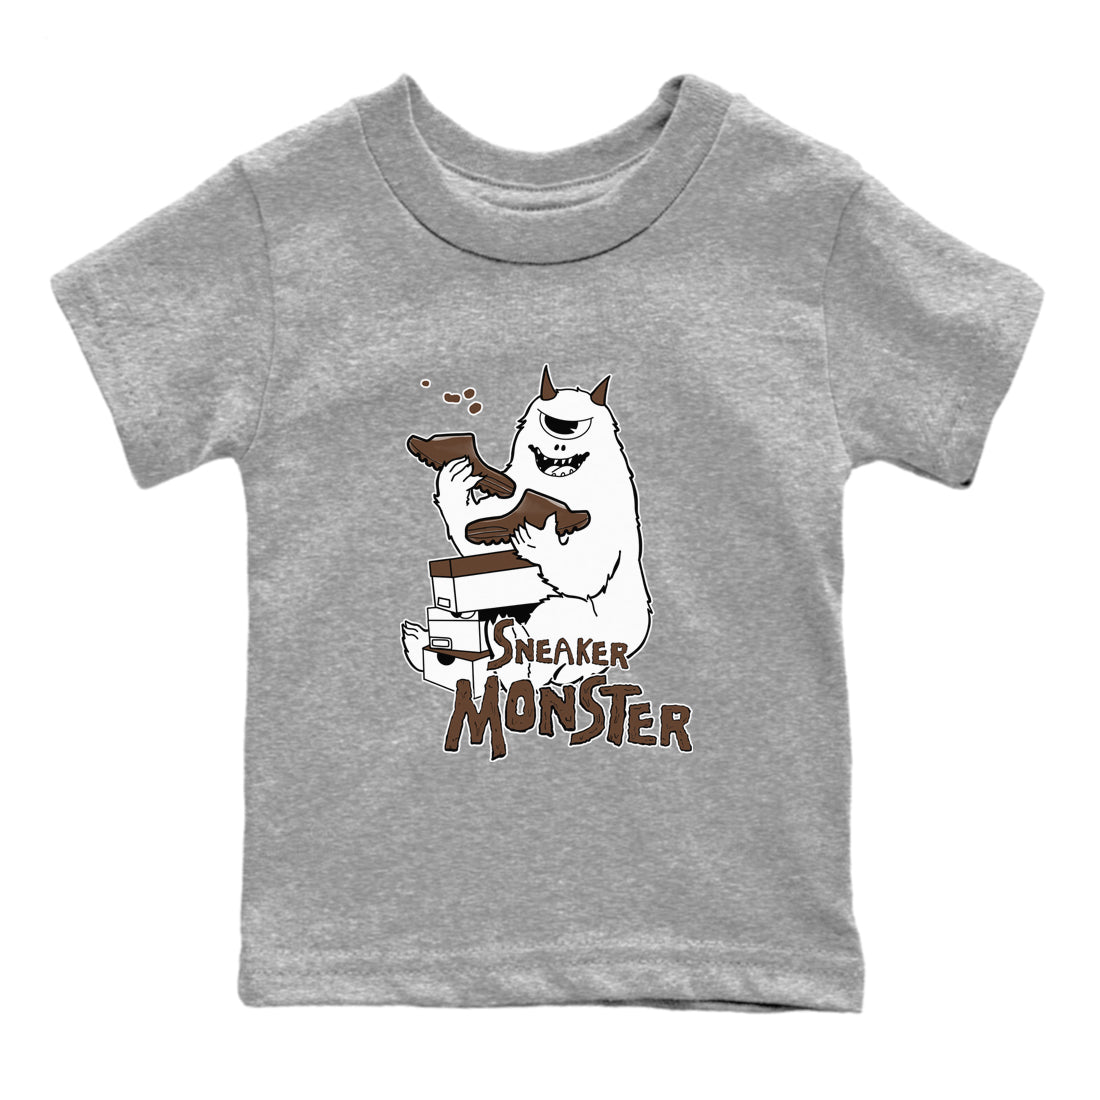 Yeezy Slide Flax shirts to match jordans Sneaker Monster sneaker match tees Yeezy Slide Flax SNRT Sneaker Tees streetwear brand Baby and Youth Heather Grey 2 cotton tee